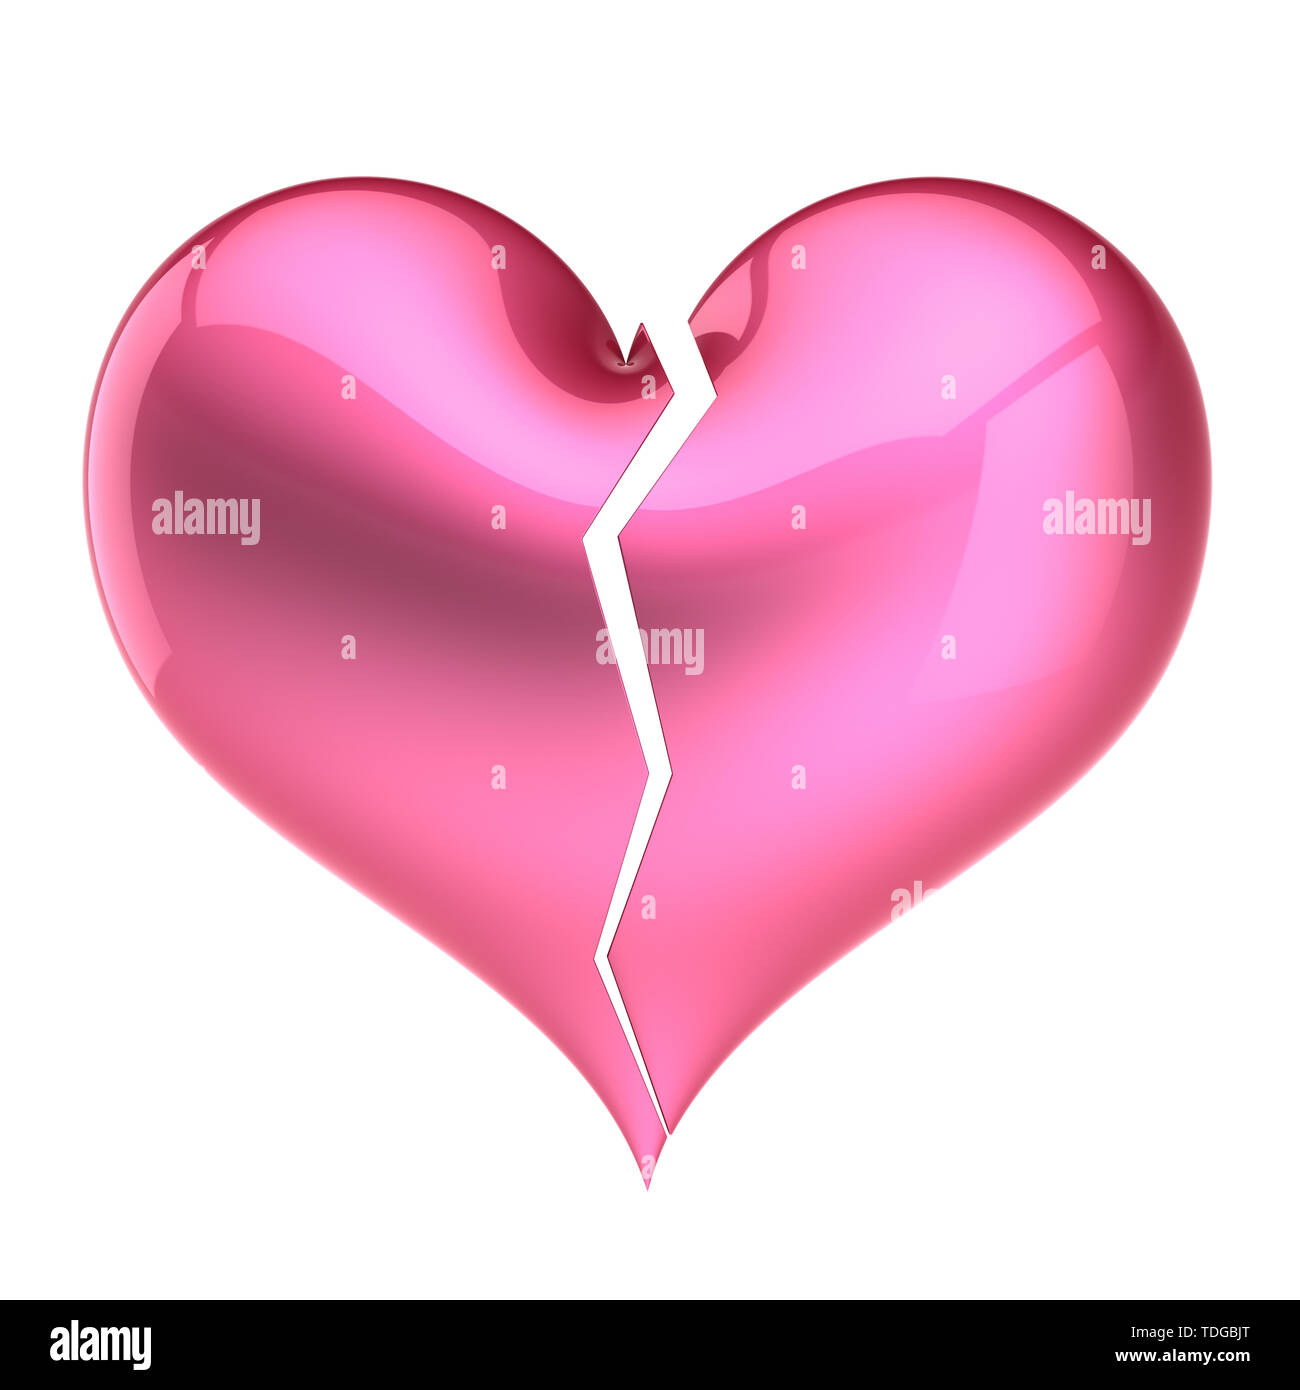 Heart shape broken pink. Fall out of love concept. Bored lover depression  divorce abstract. 3d illustration isolated on white background Stock Photo  - Alamy